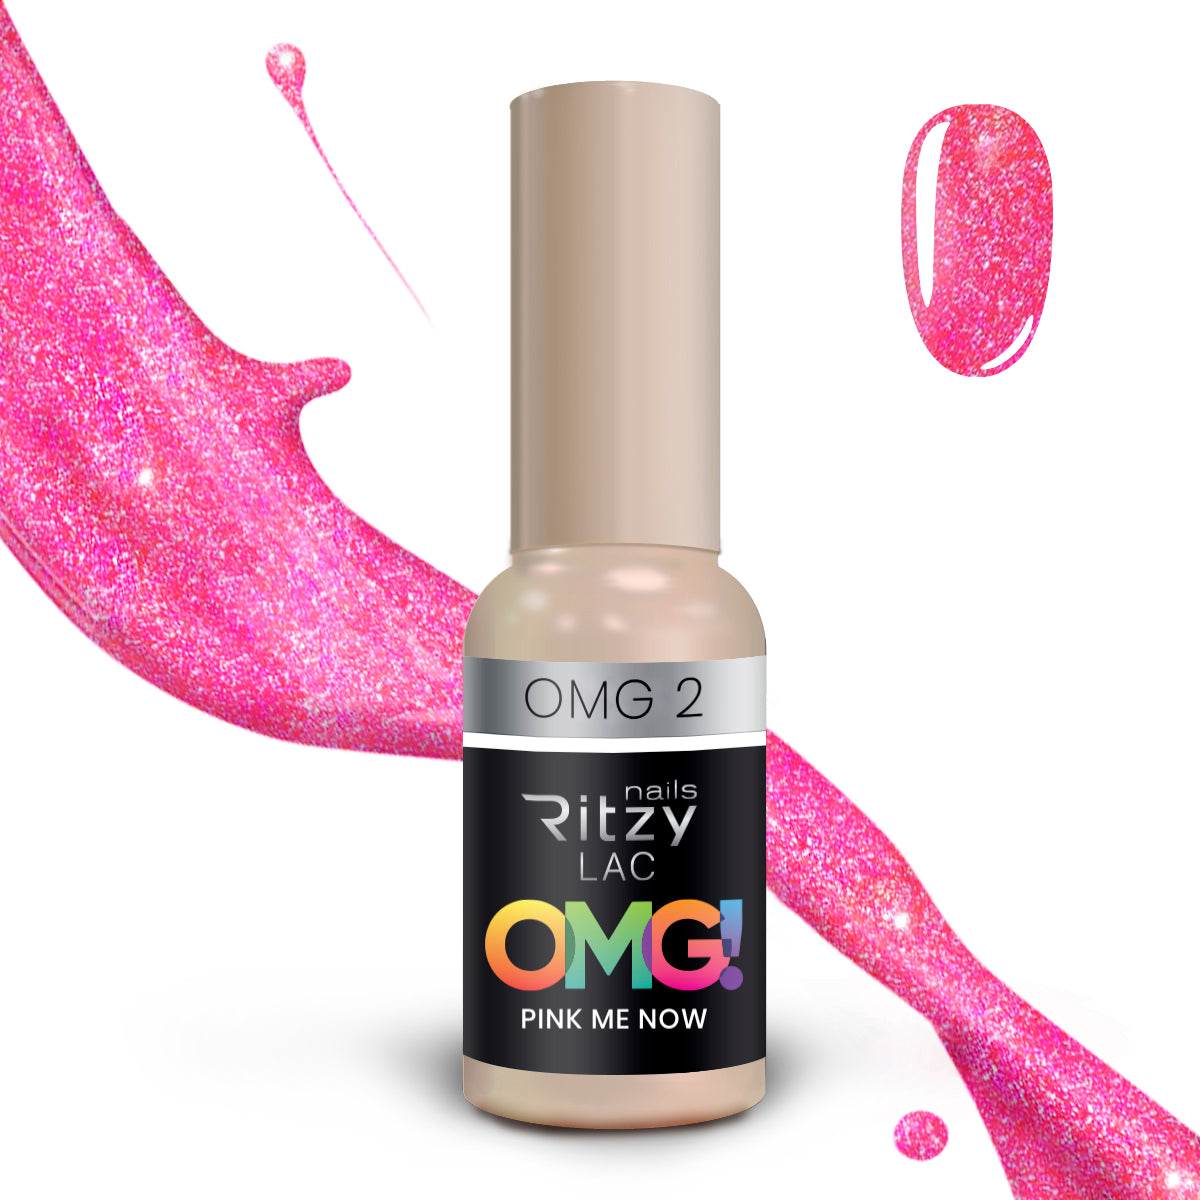 OMG 2 "Pink me now" Ritzy Lac